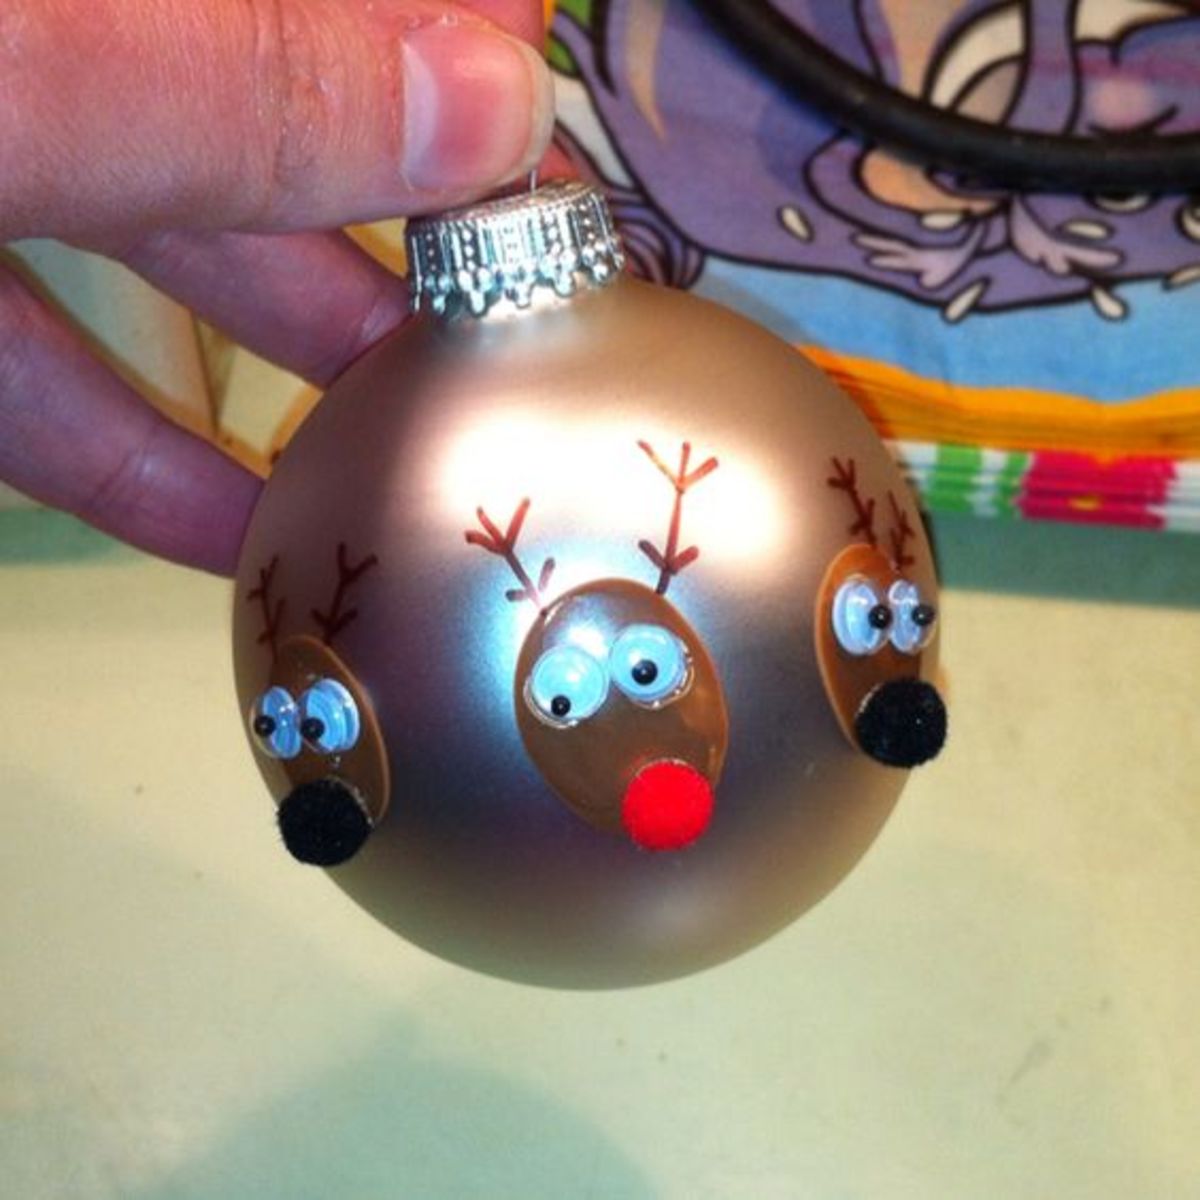 Thumbprint reindeer ornaments for the grandparents!